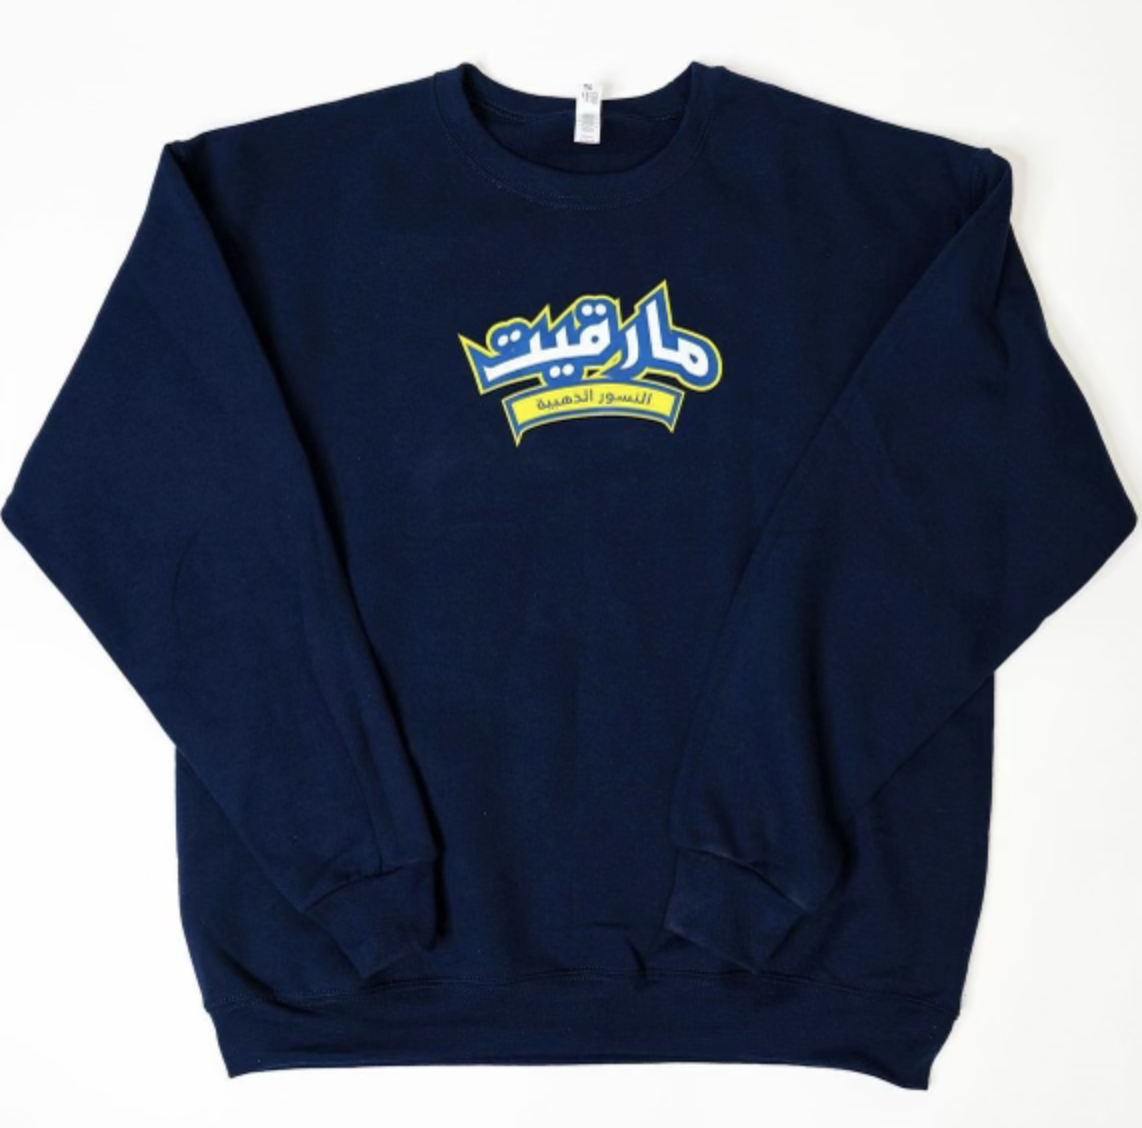 Mock up of Alis Marquette hoodie design.

Photo Courtesy of Mariam Ali.